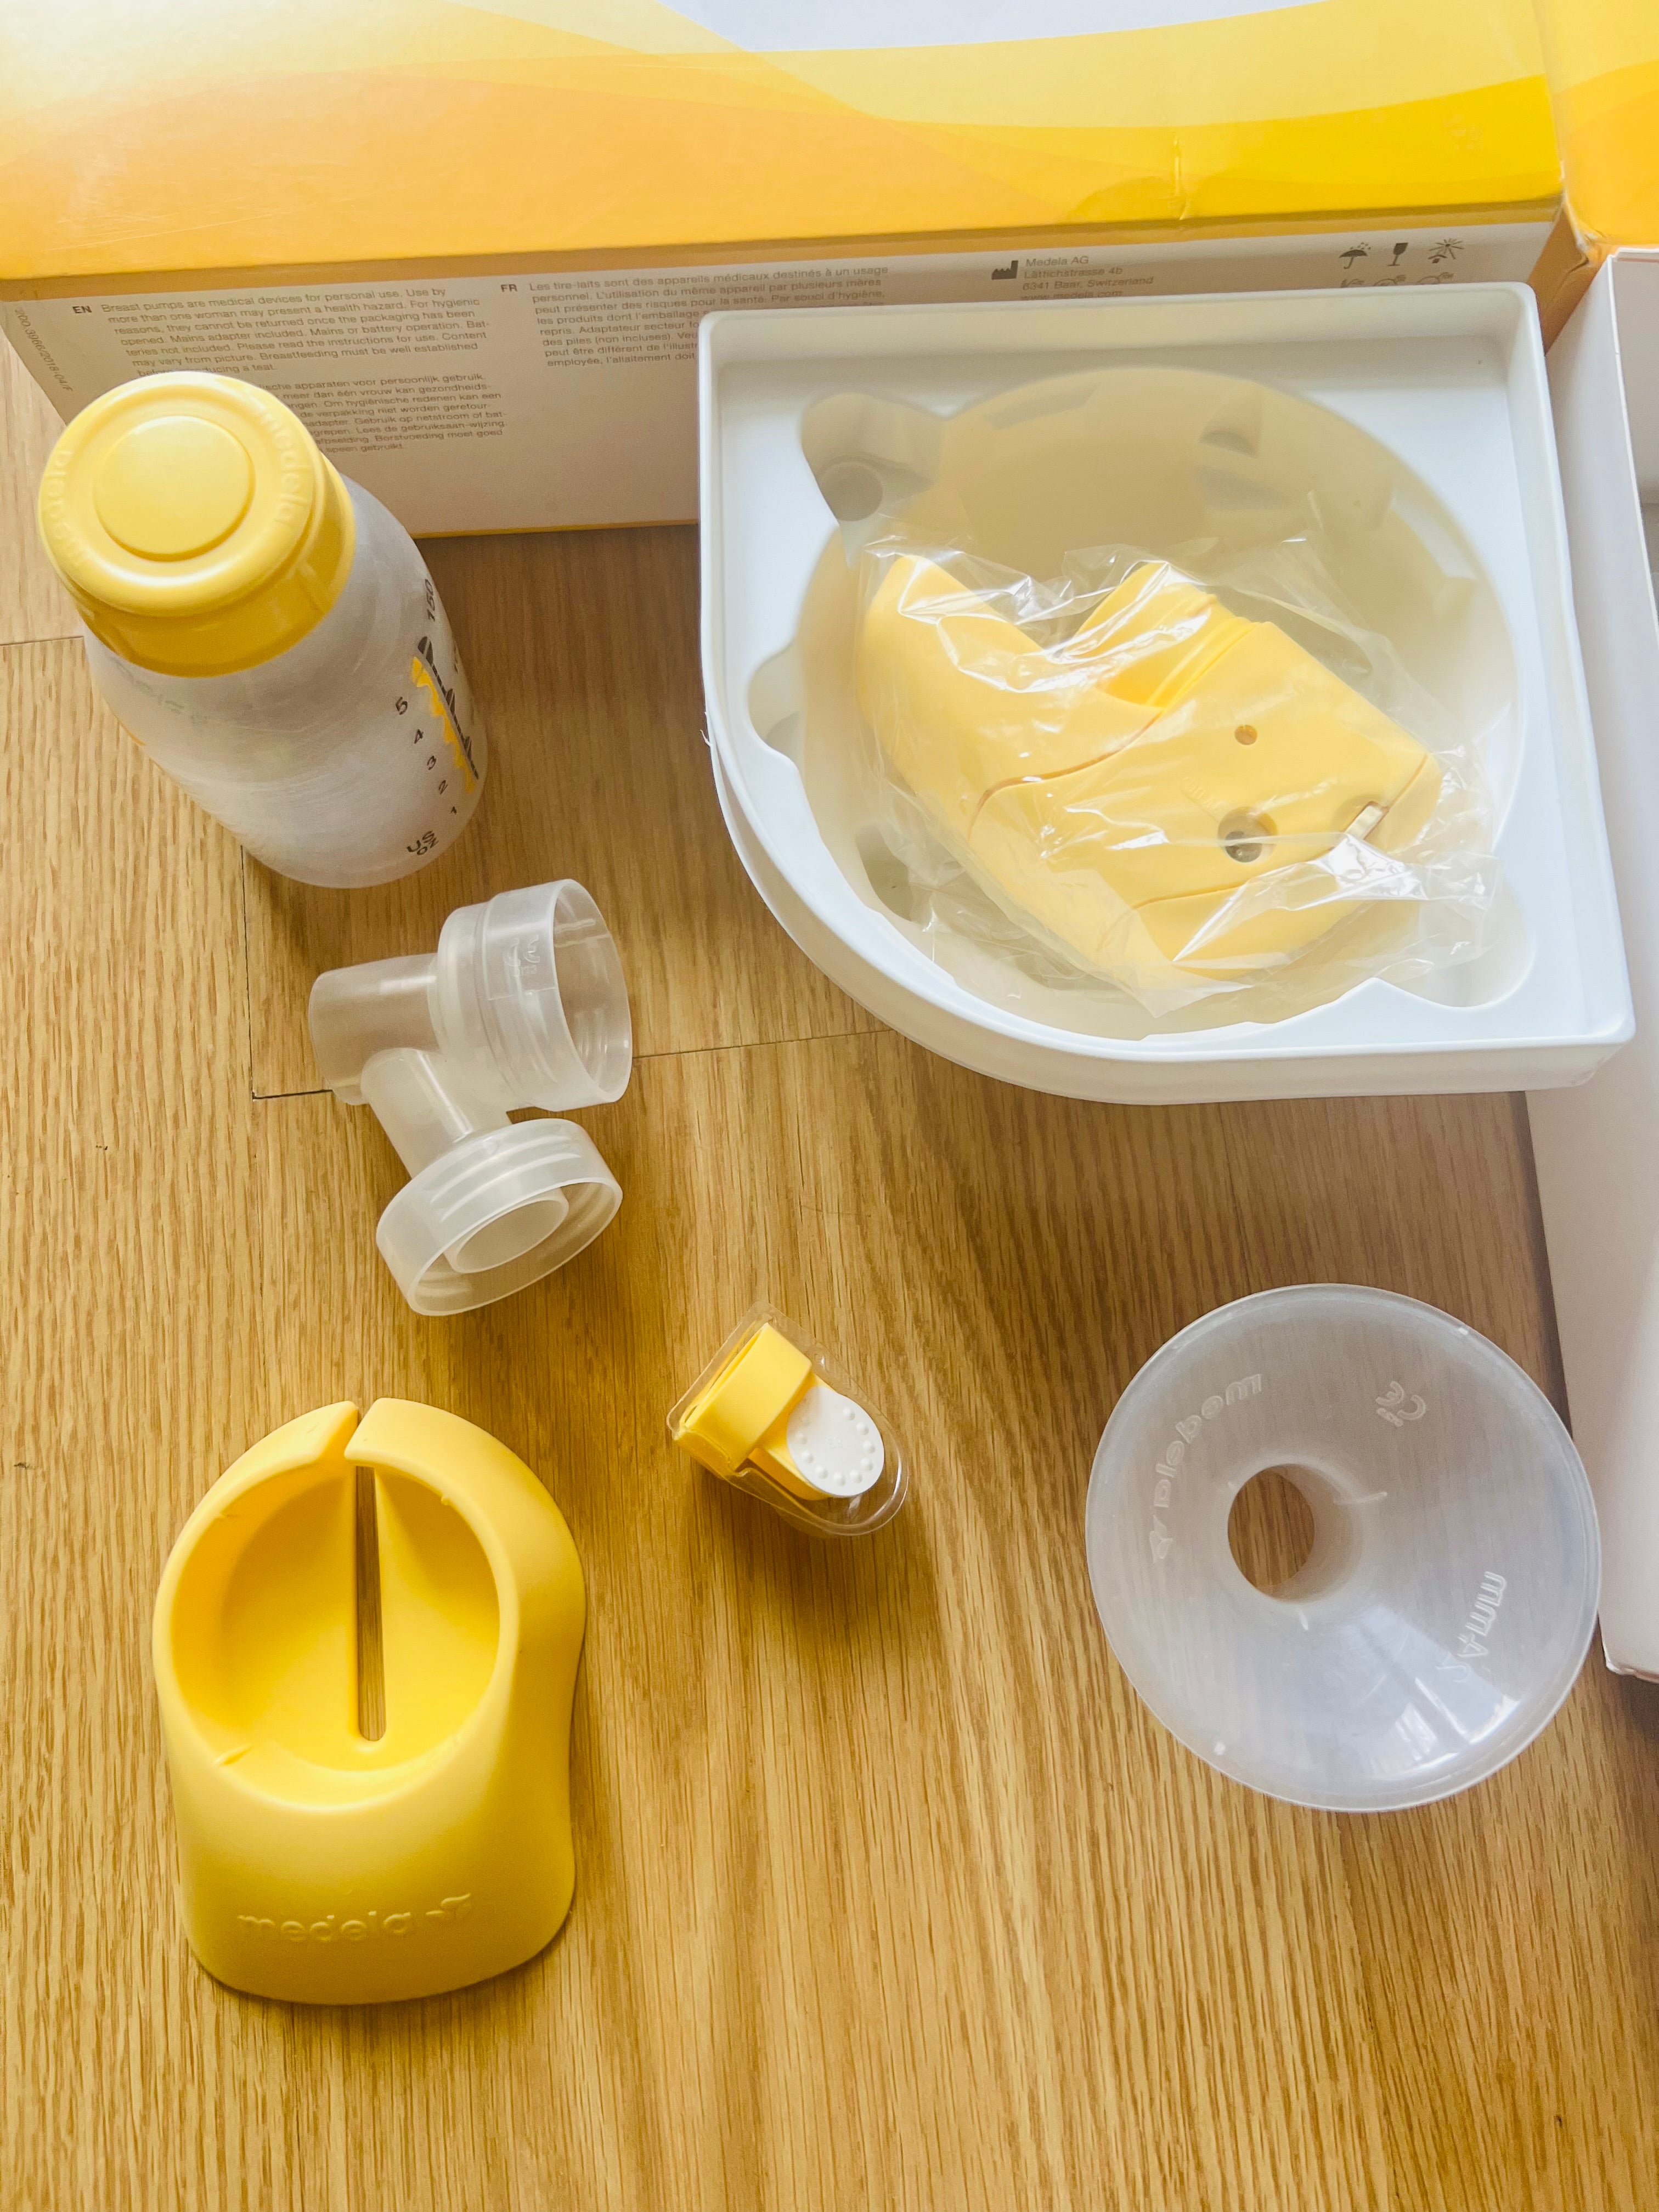 Medela Yellow Electric, Buy Baby Care Products in India